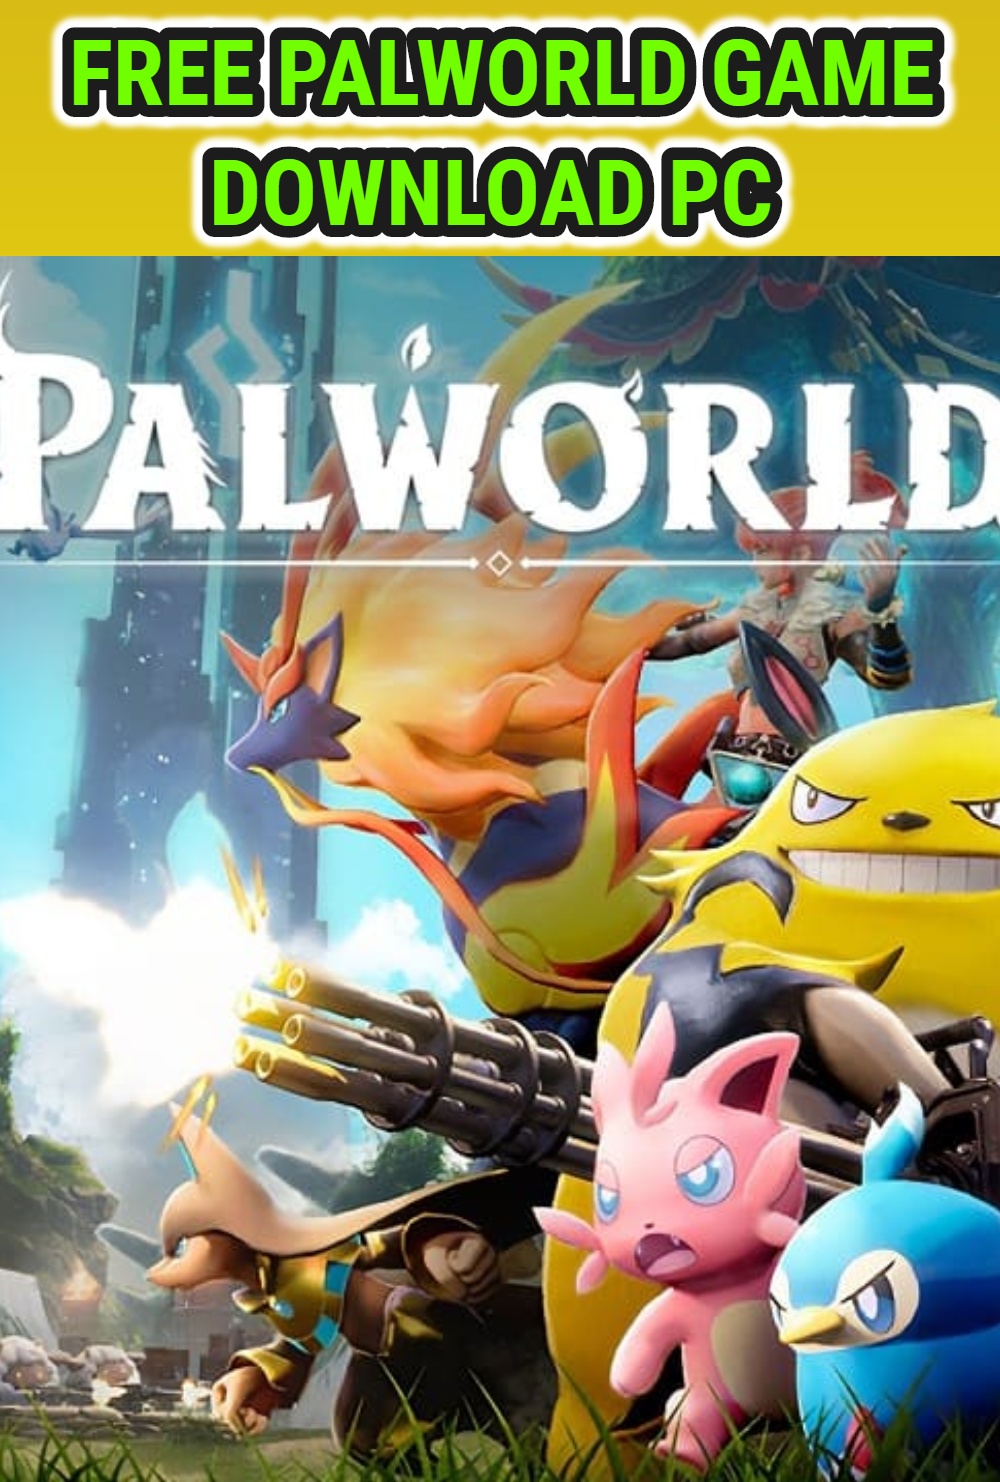 Download Palworld For Free On PC